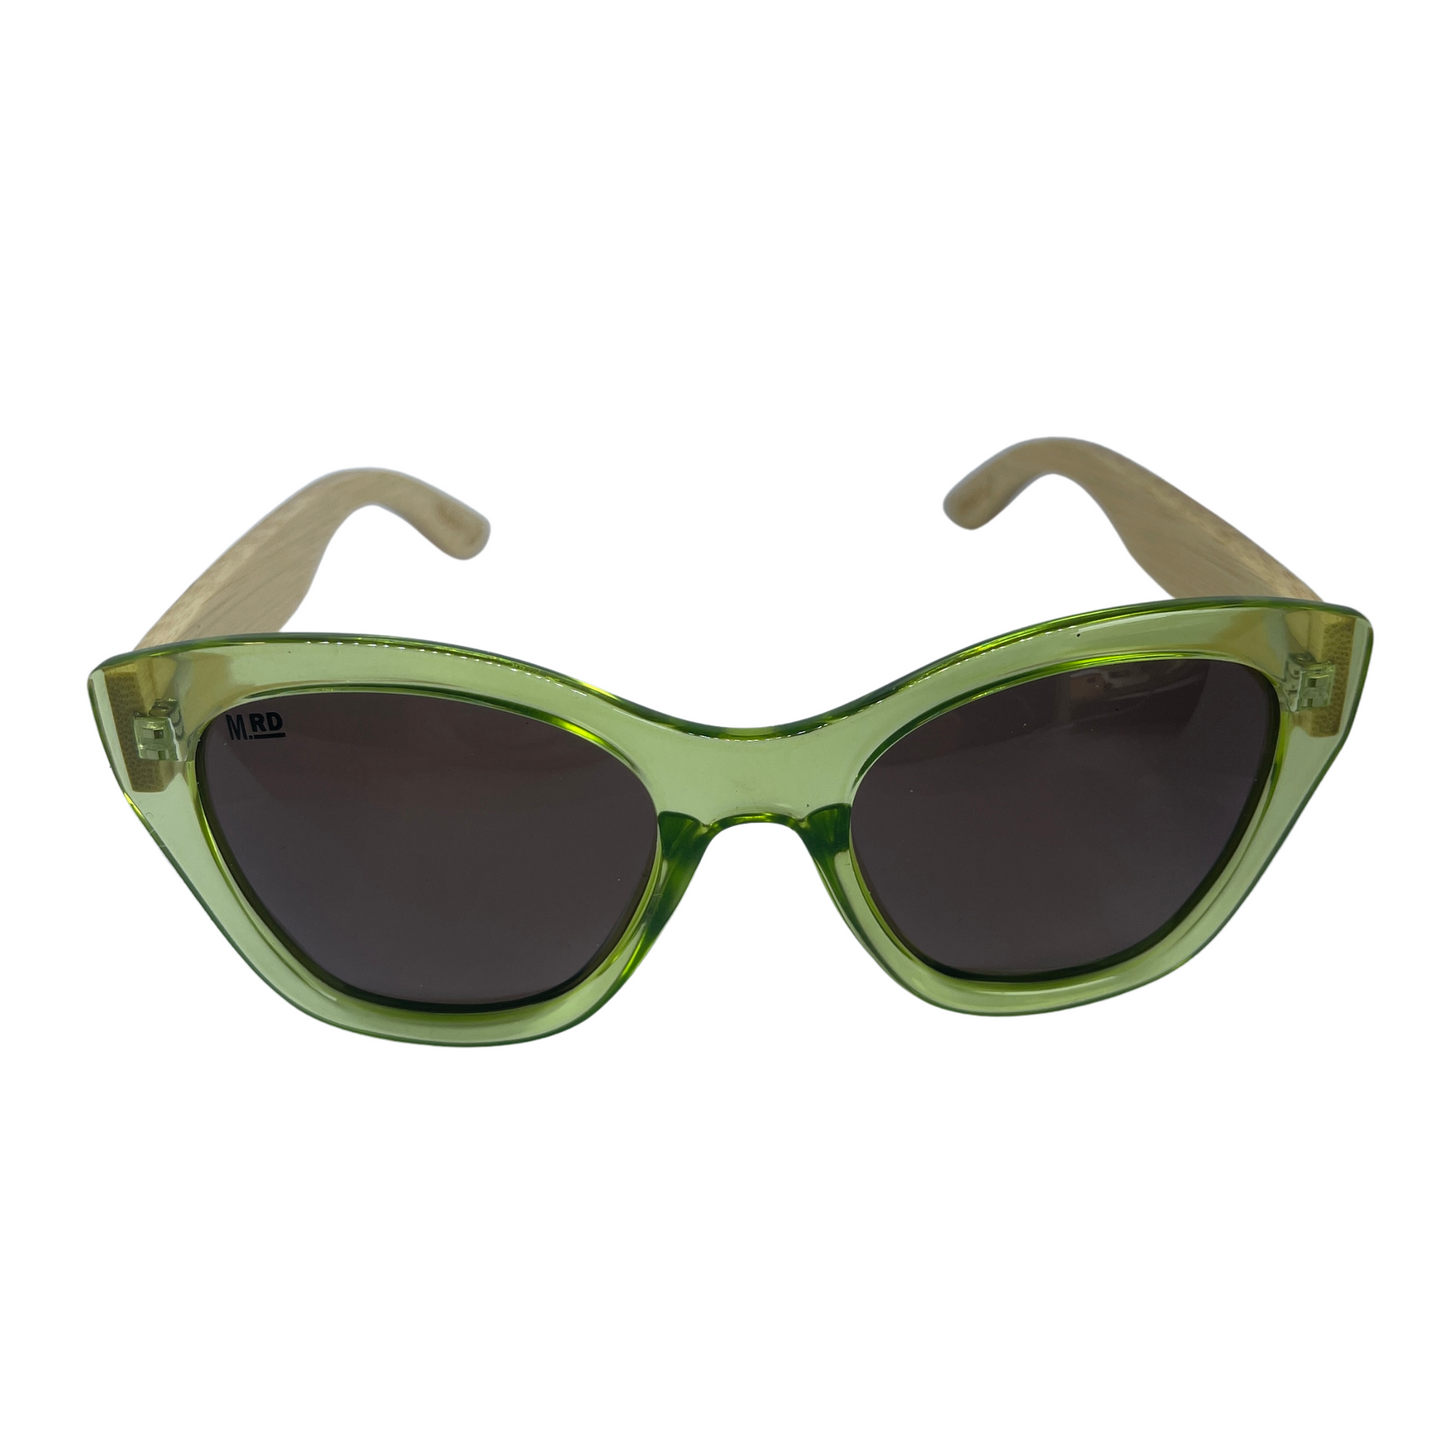 Womens sunglasses with light green frame and bamboo arms.